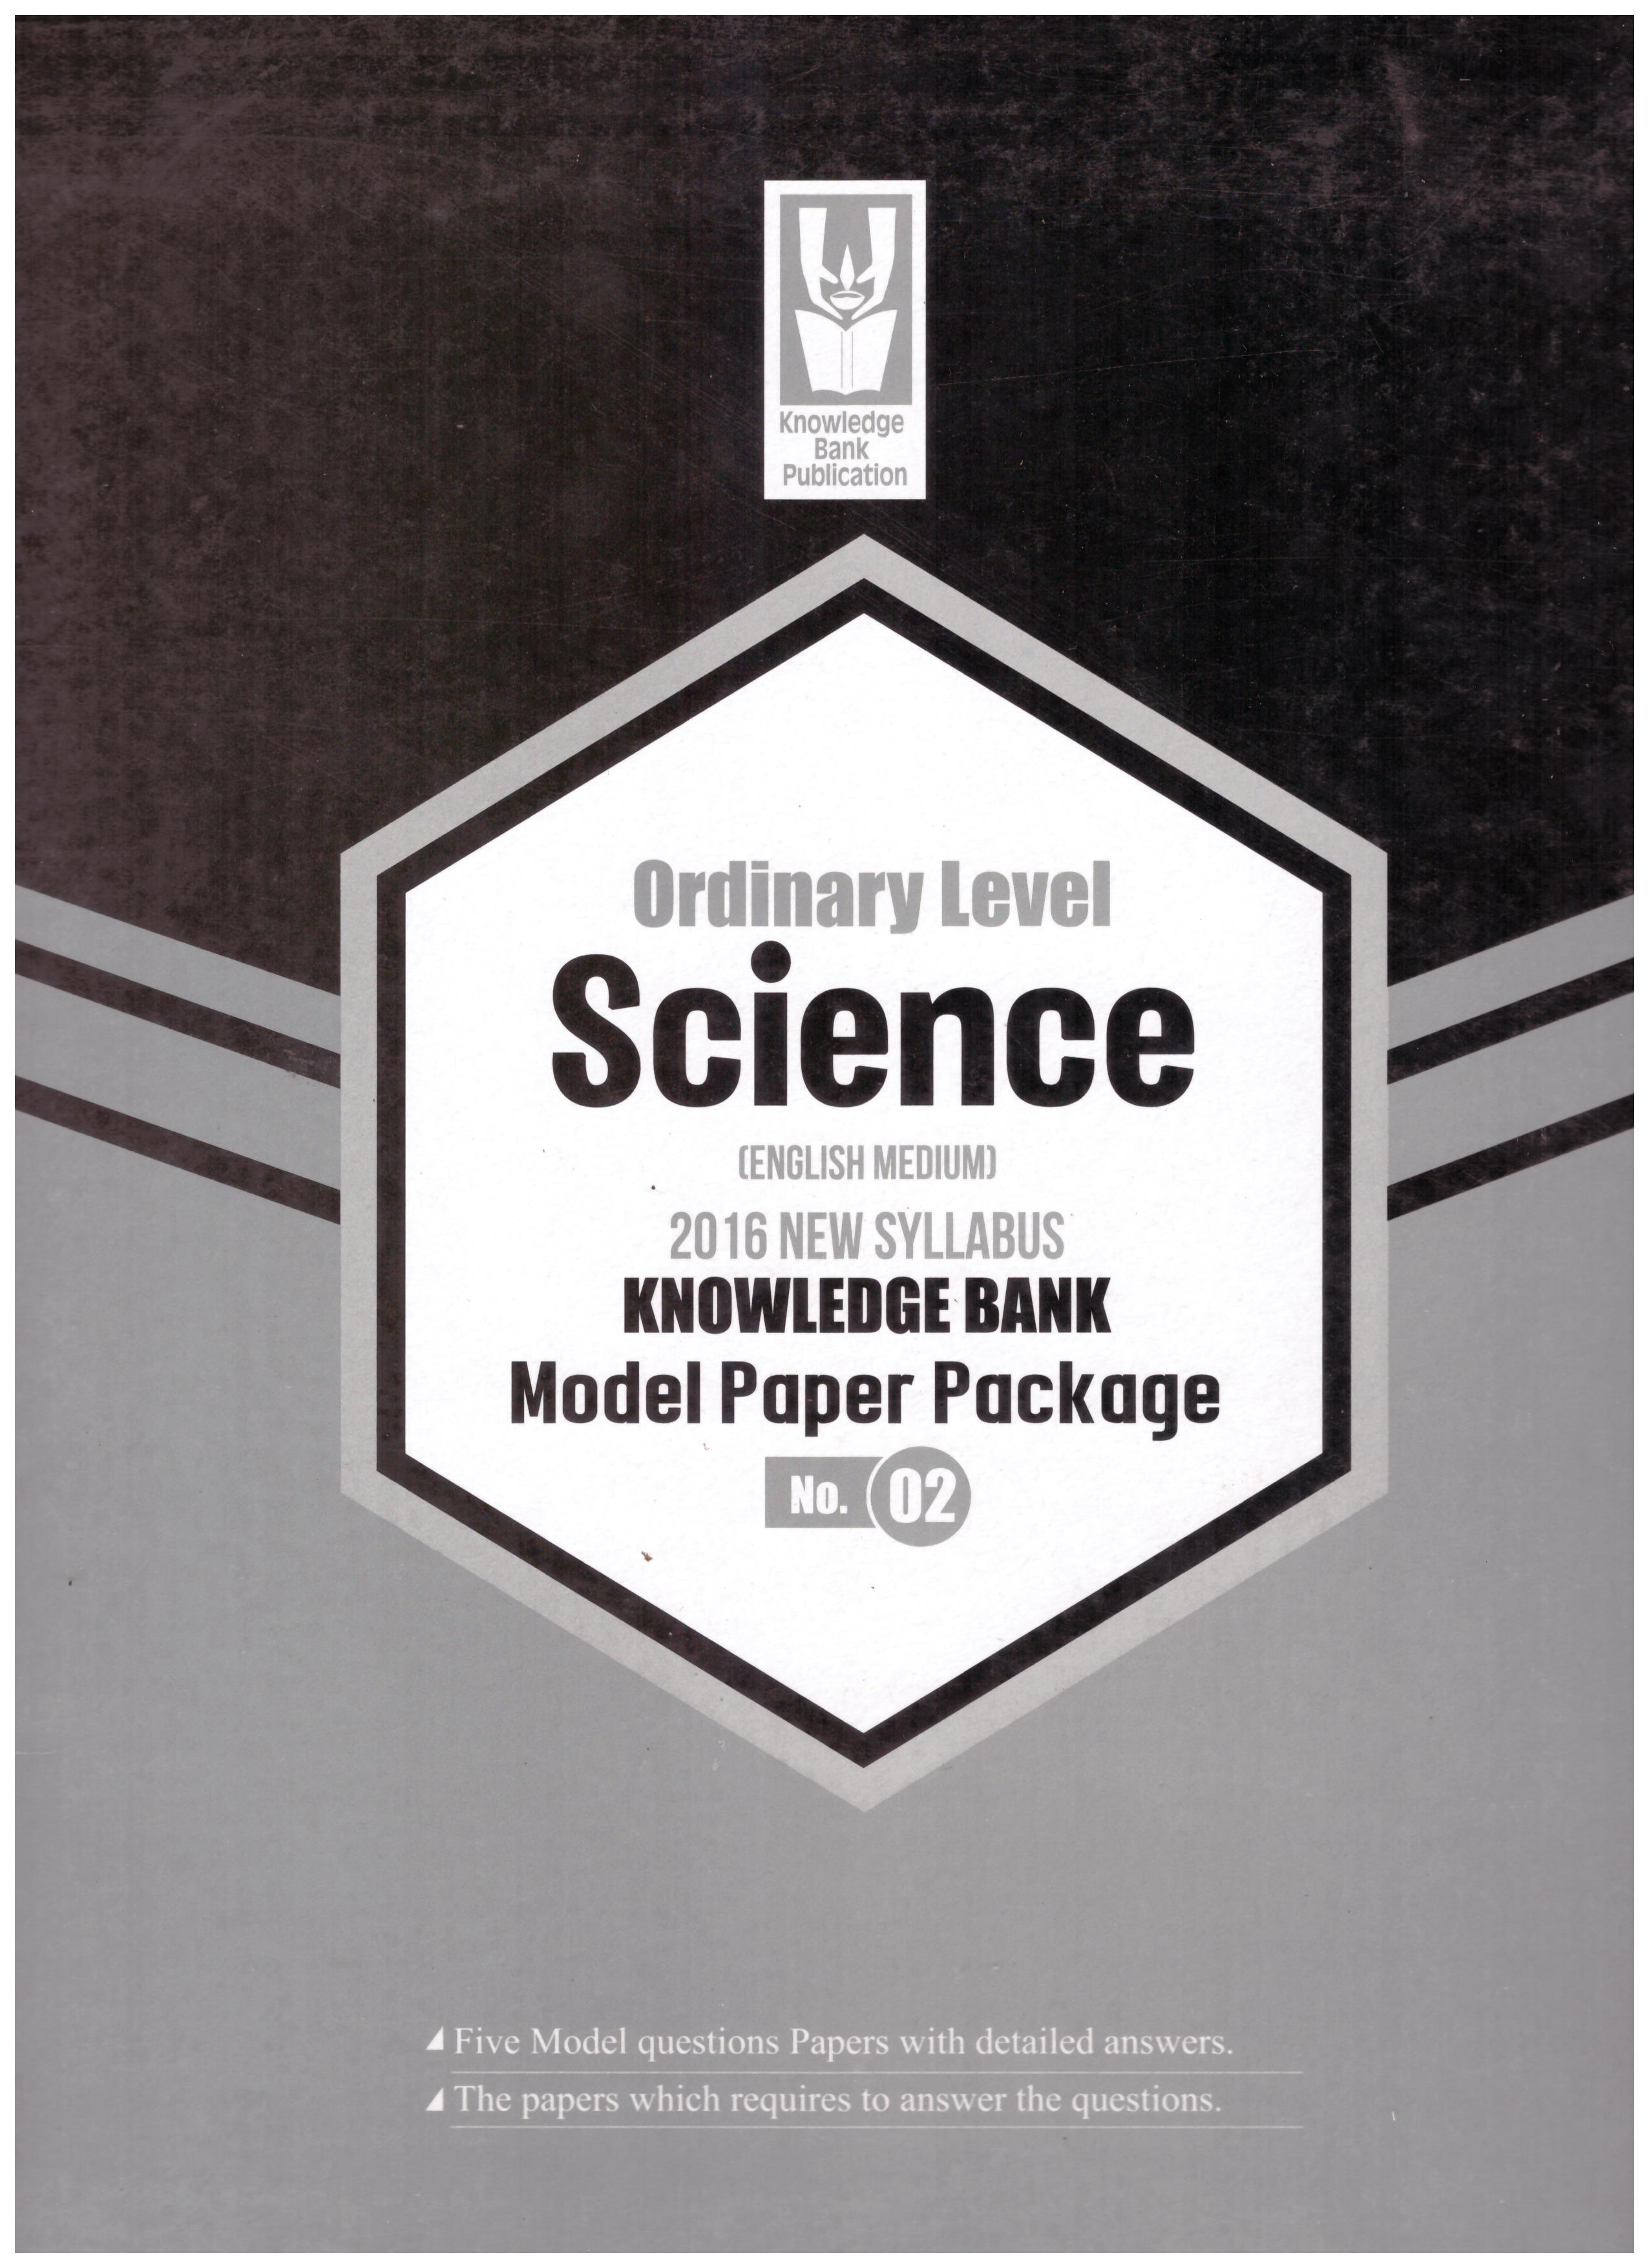 Knowledge Bank O/L Science Model Paper Package No.02